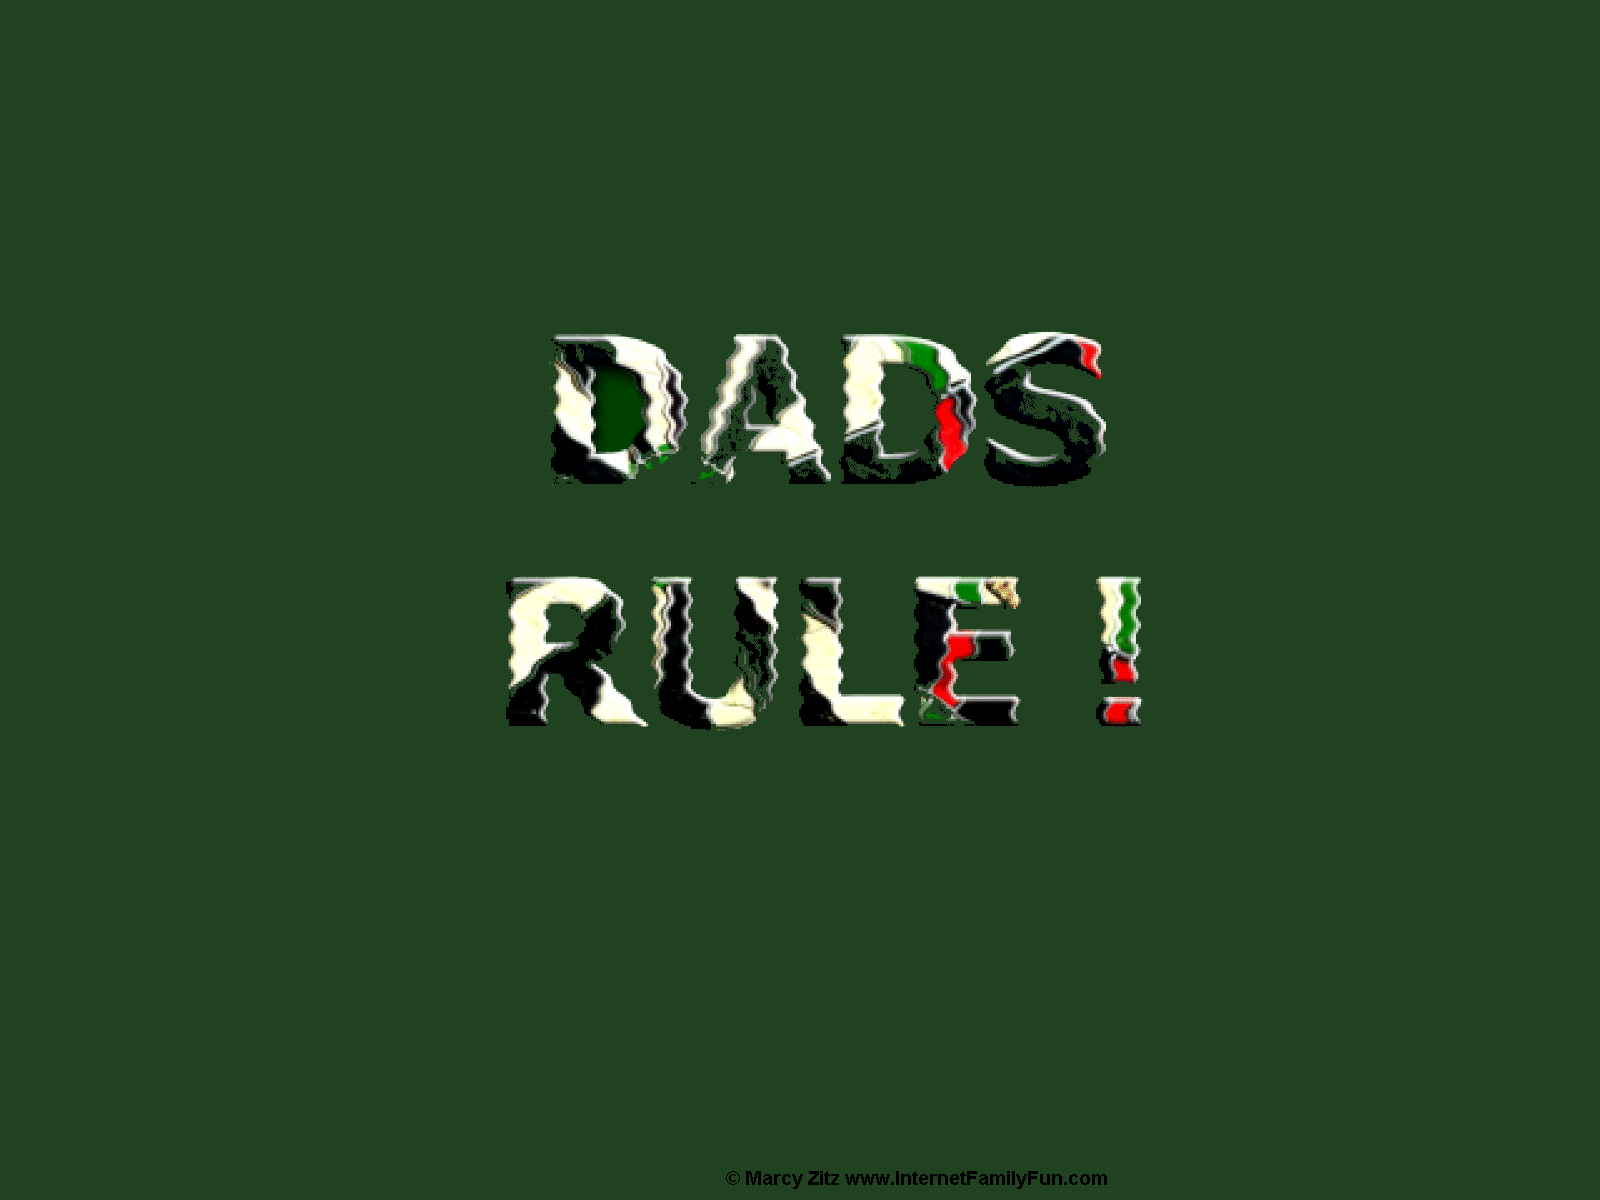 Fathers Day Wallpaper Background for Desktop